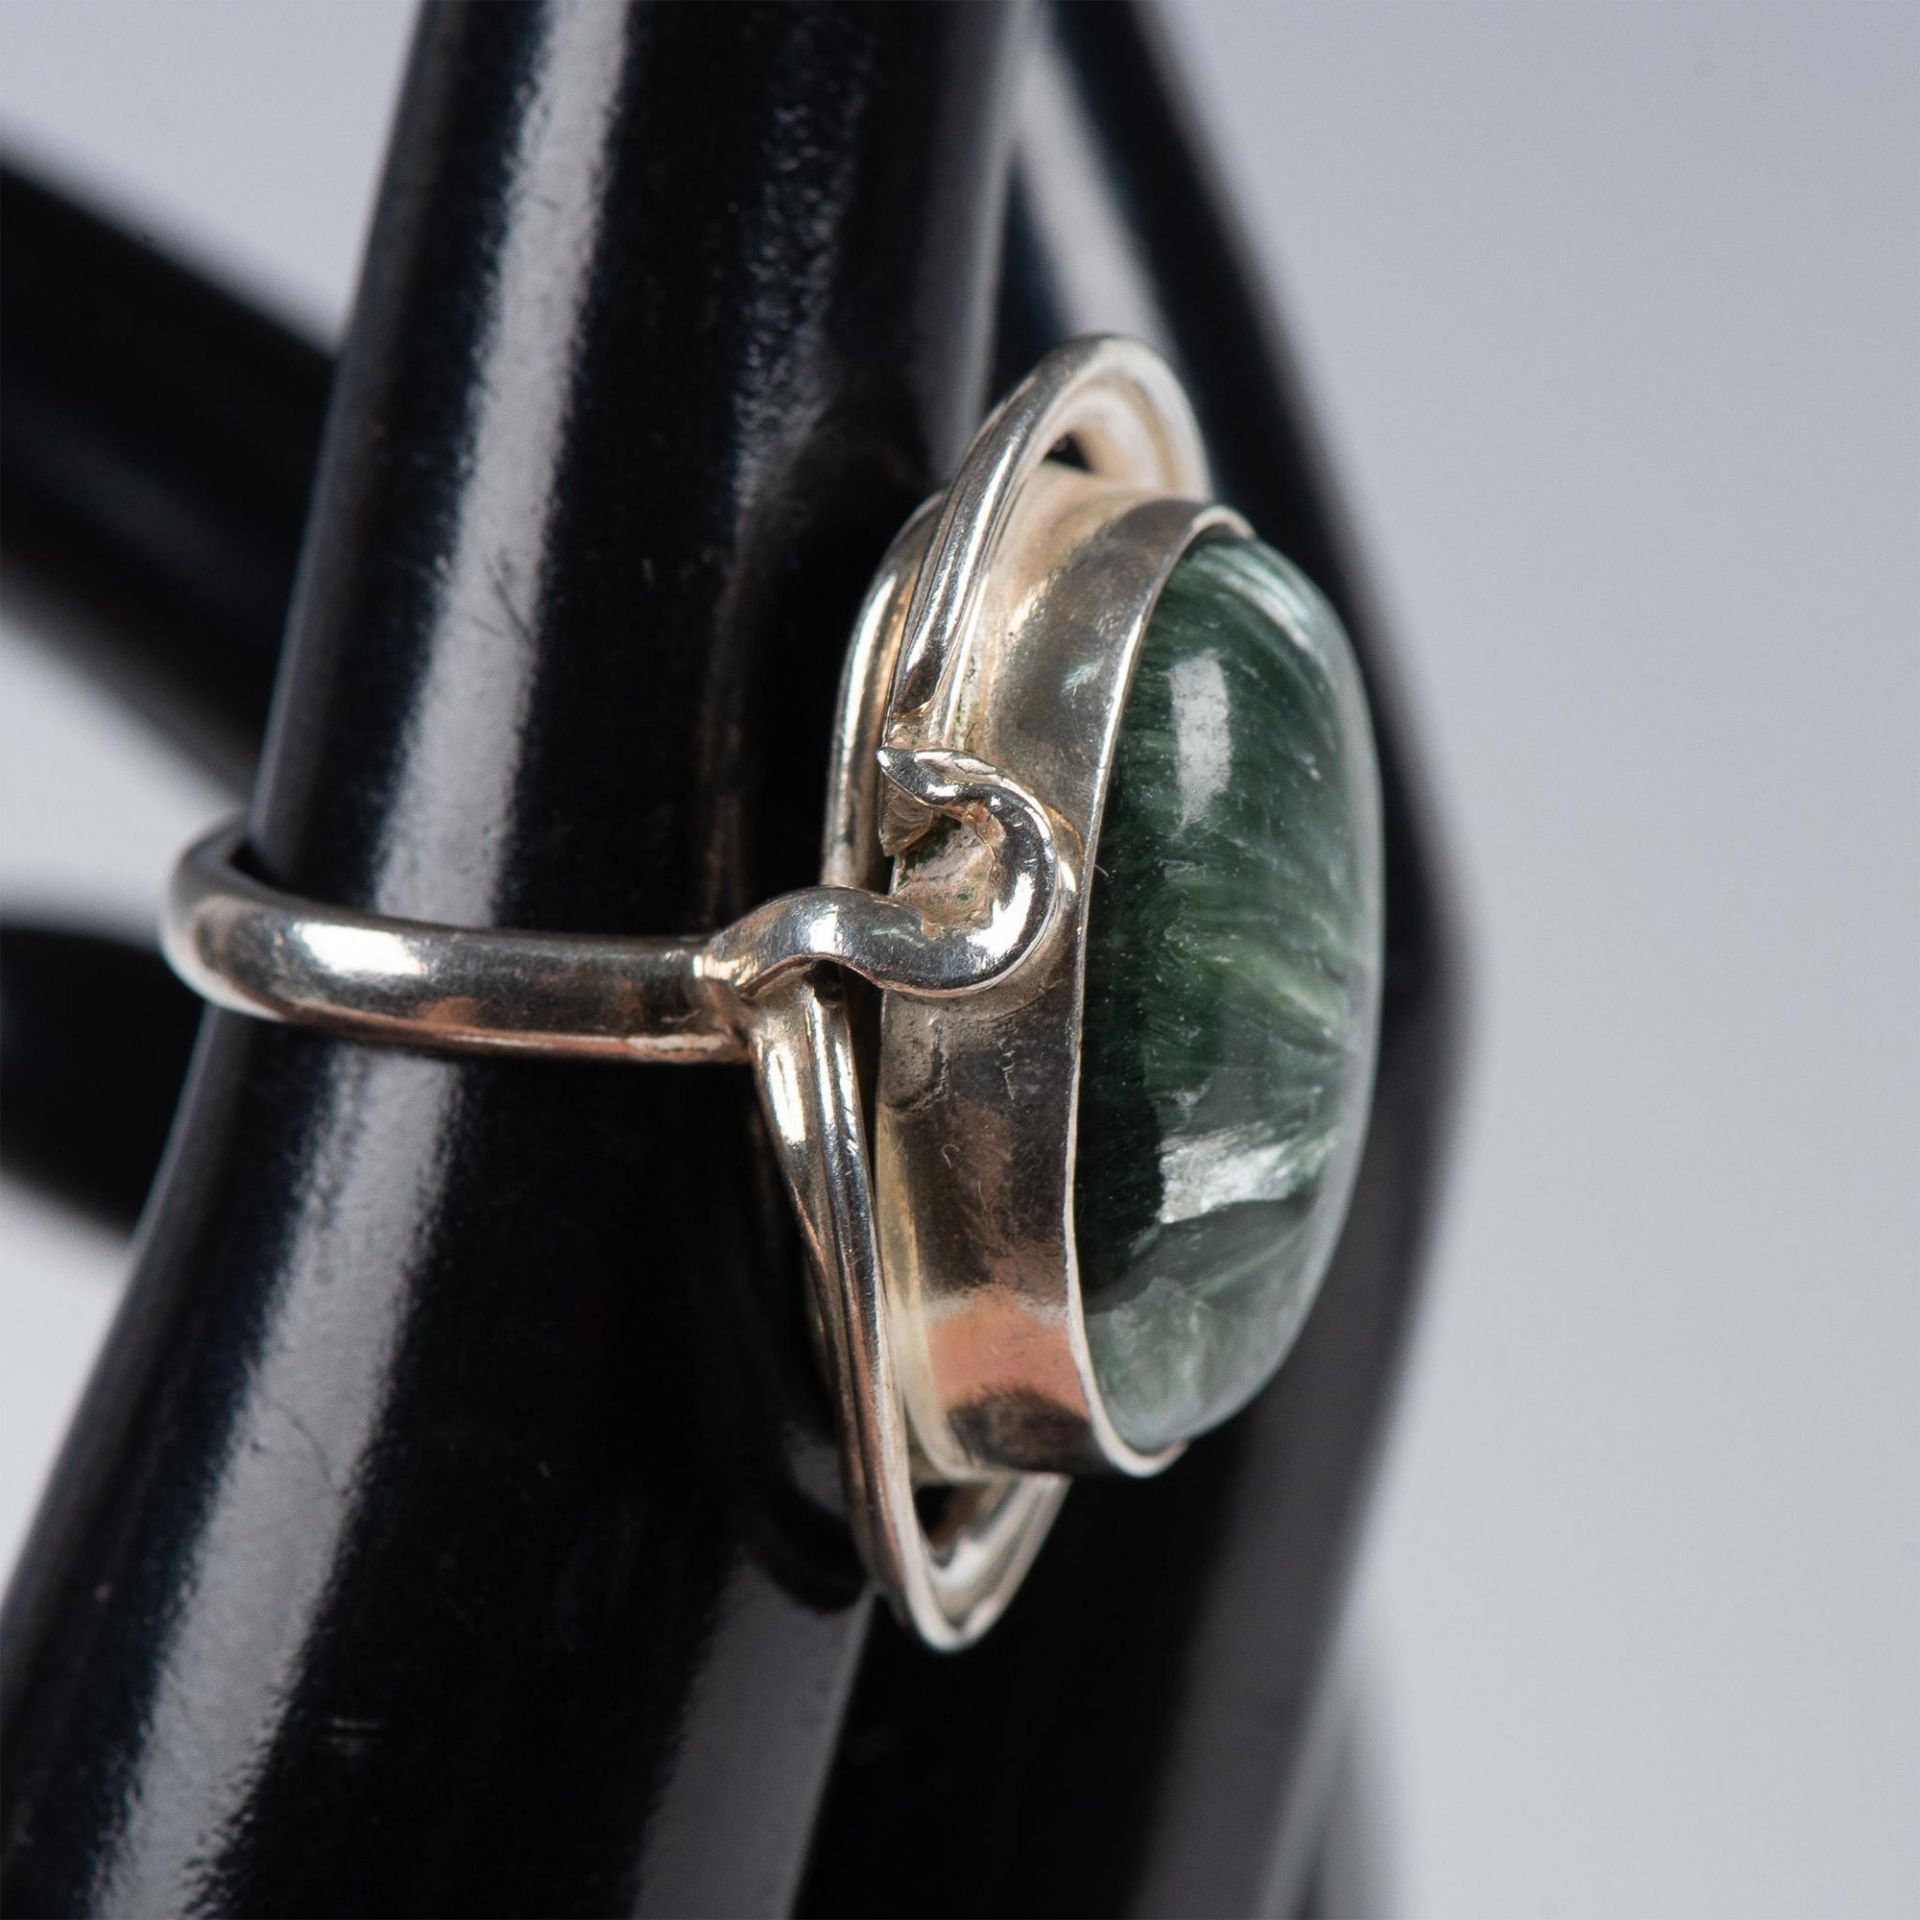 Native American Sterling Silver & Green Seraphinite Ring - Image 5 of 5